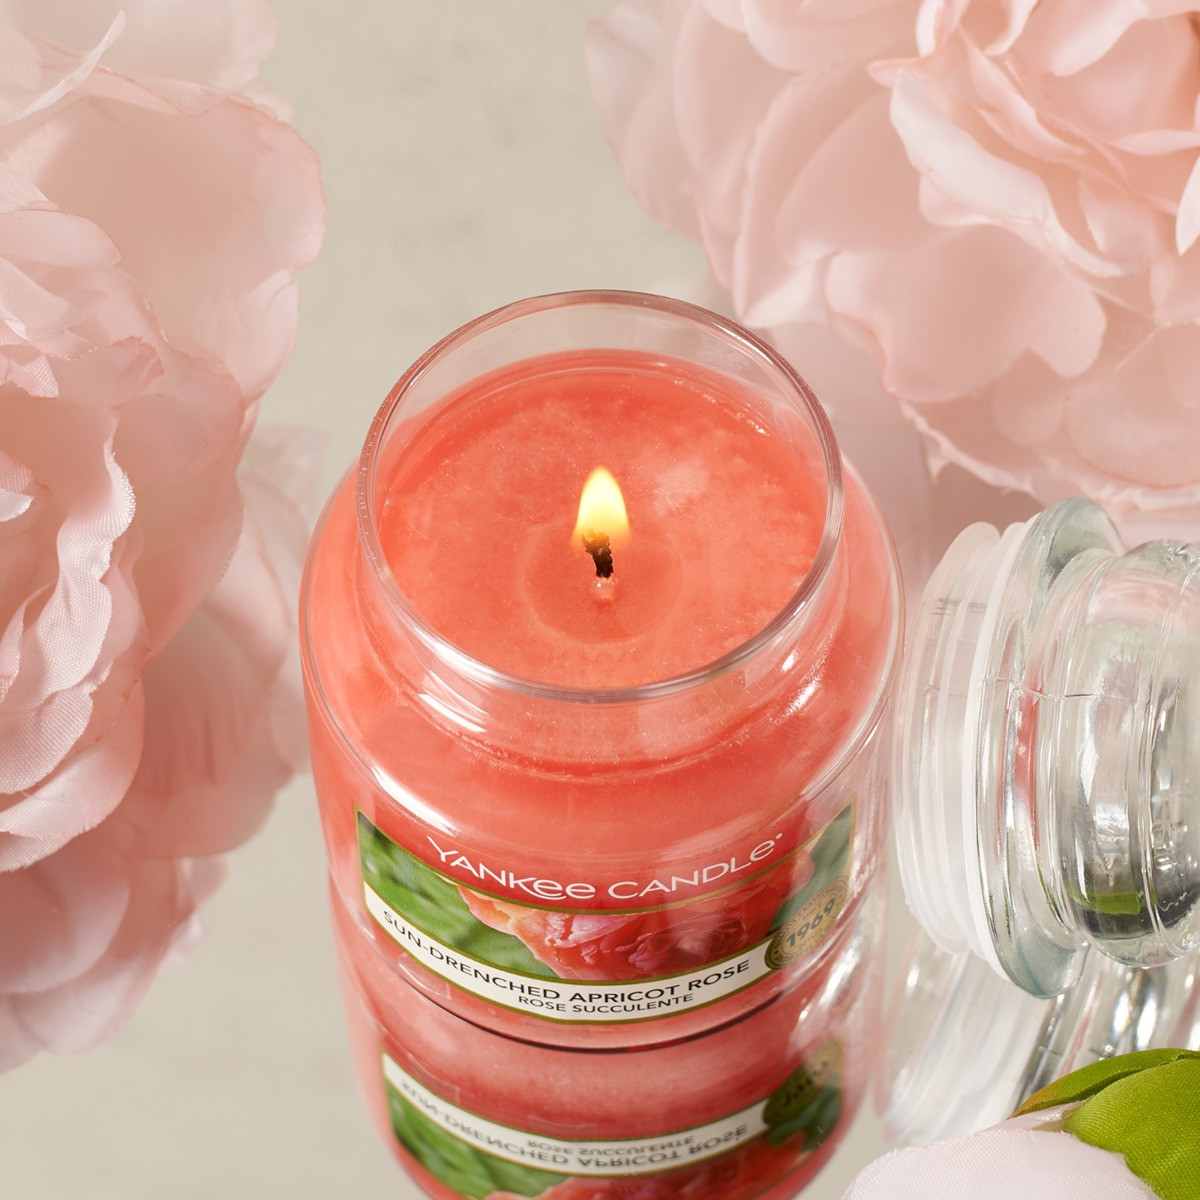 Yankee Candle Small Jar - Sun-Drenched Apricot Rose>